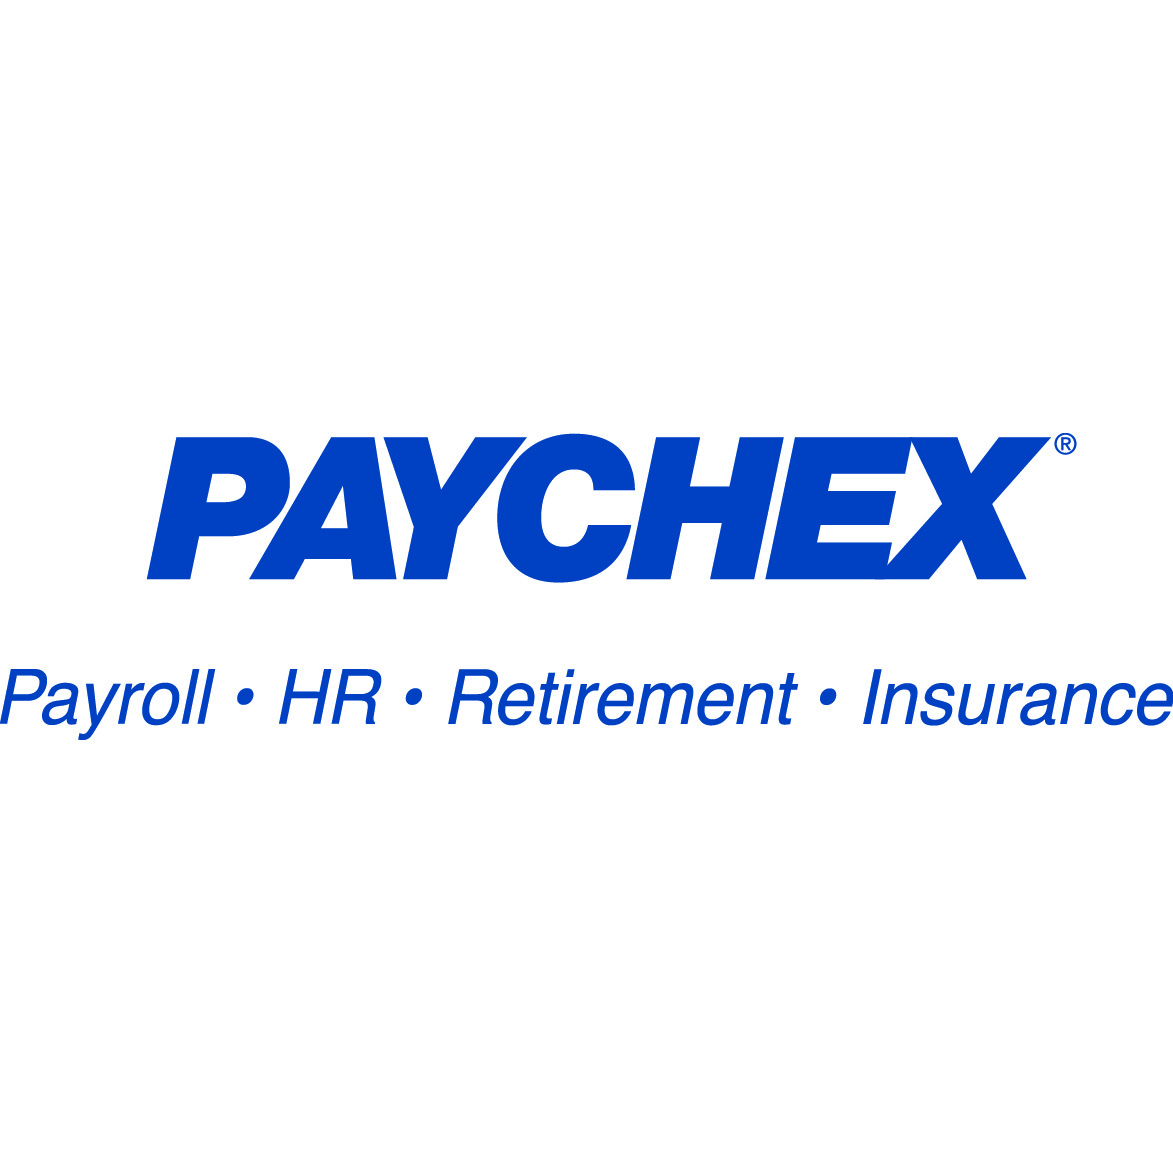 Doral Chamber of Commerce introduces Paychex.